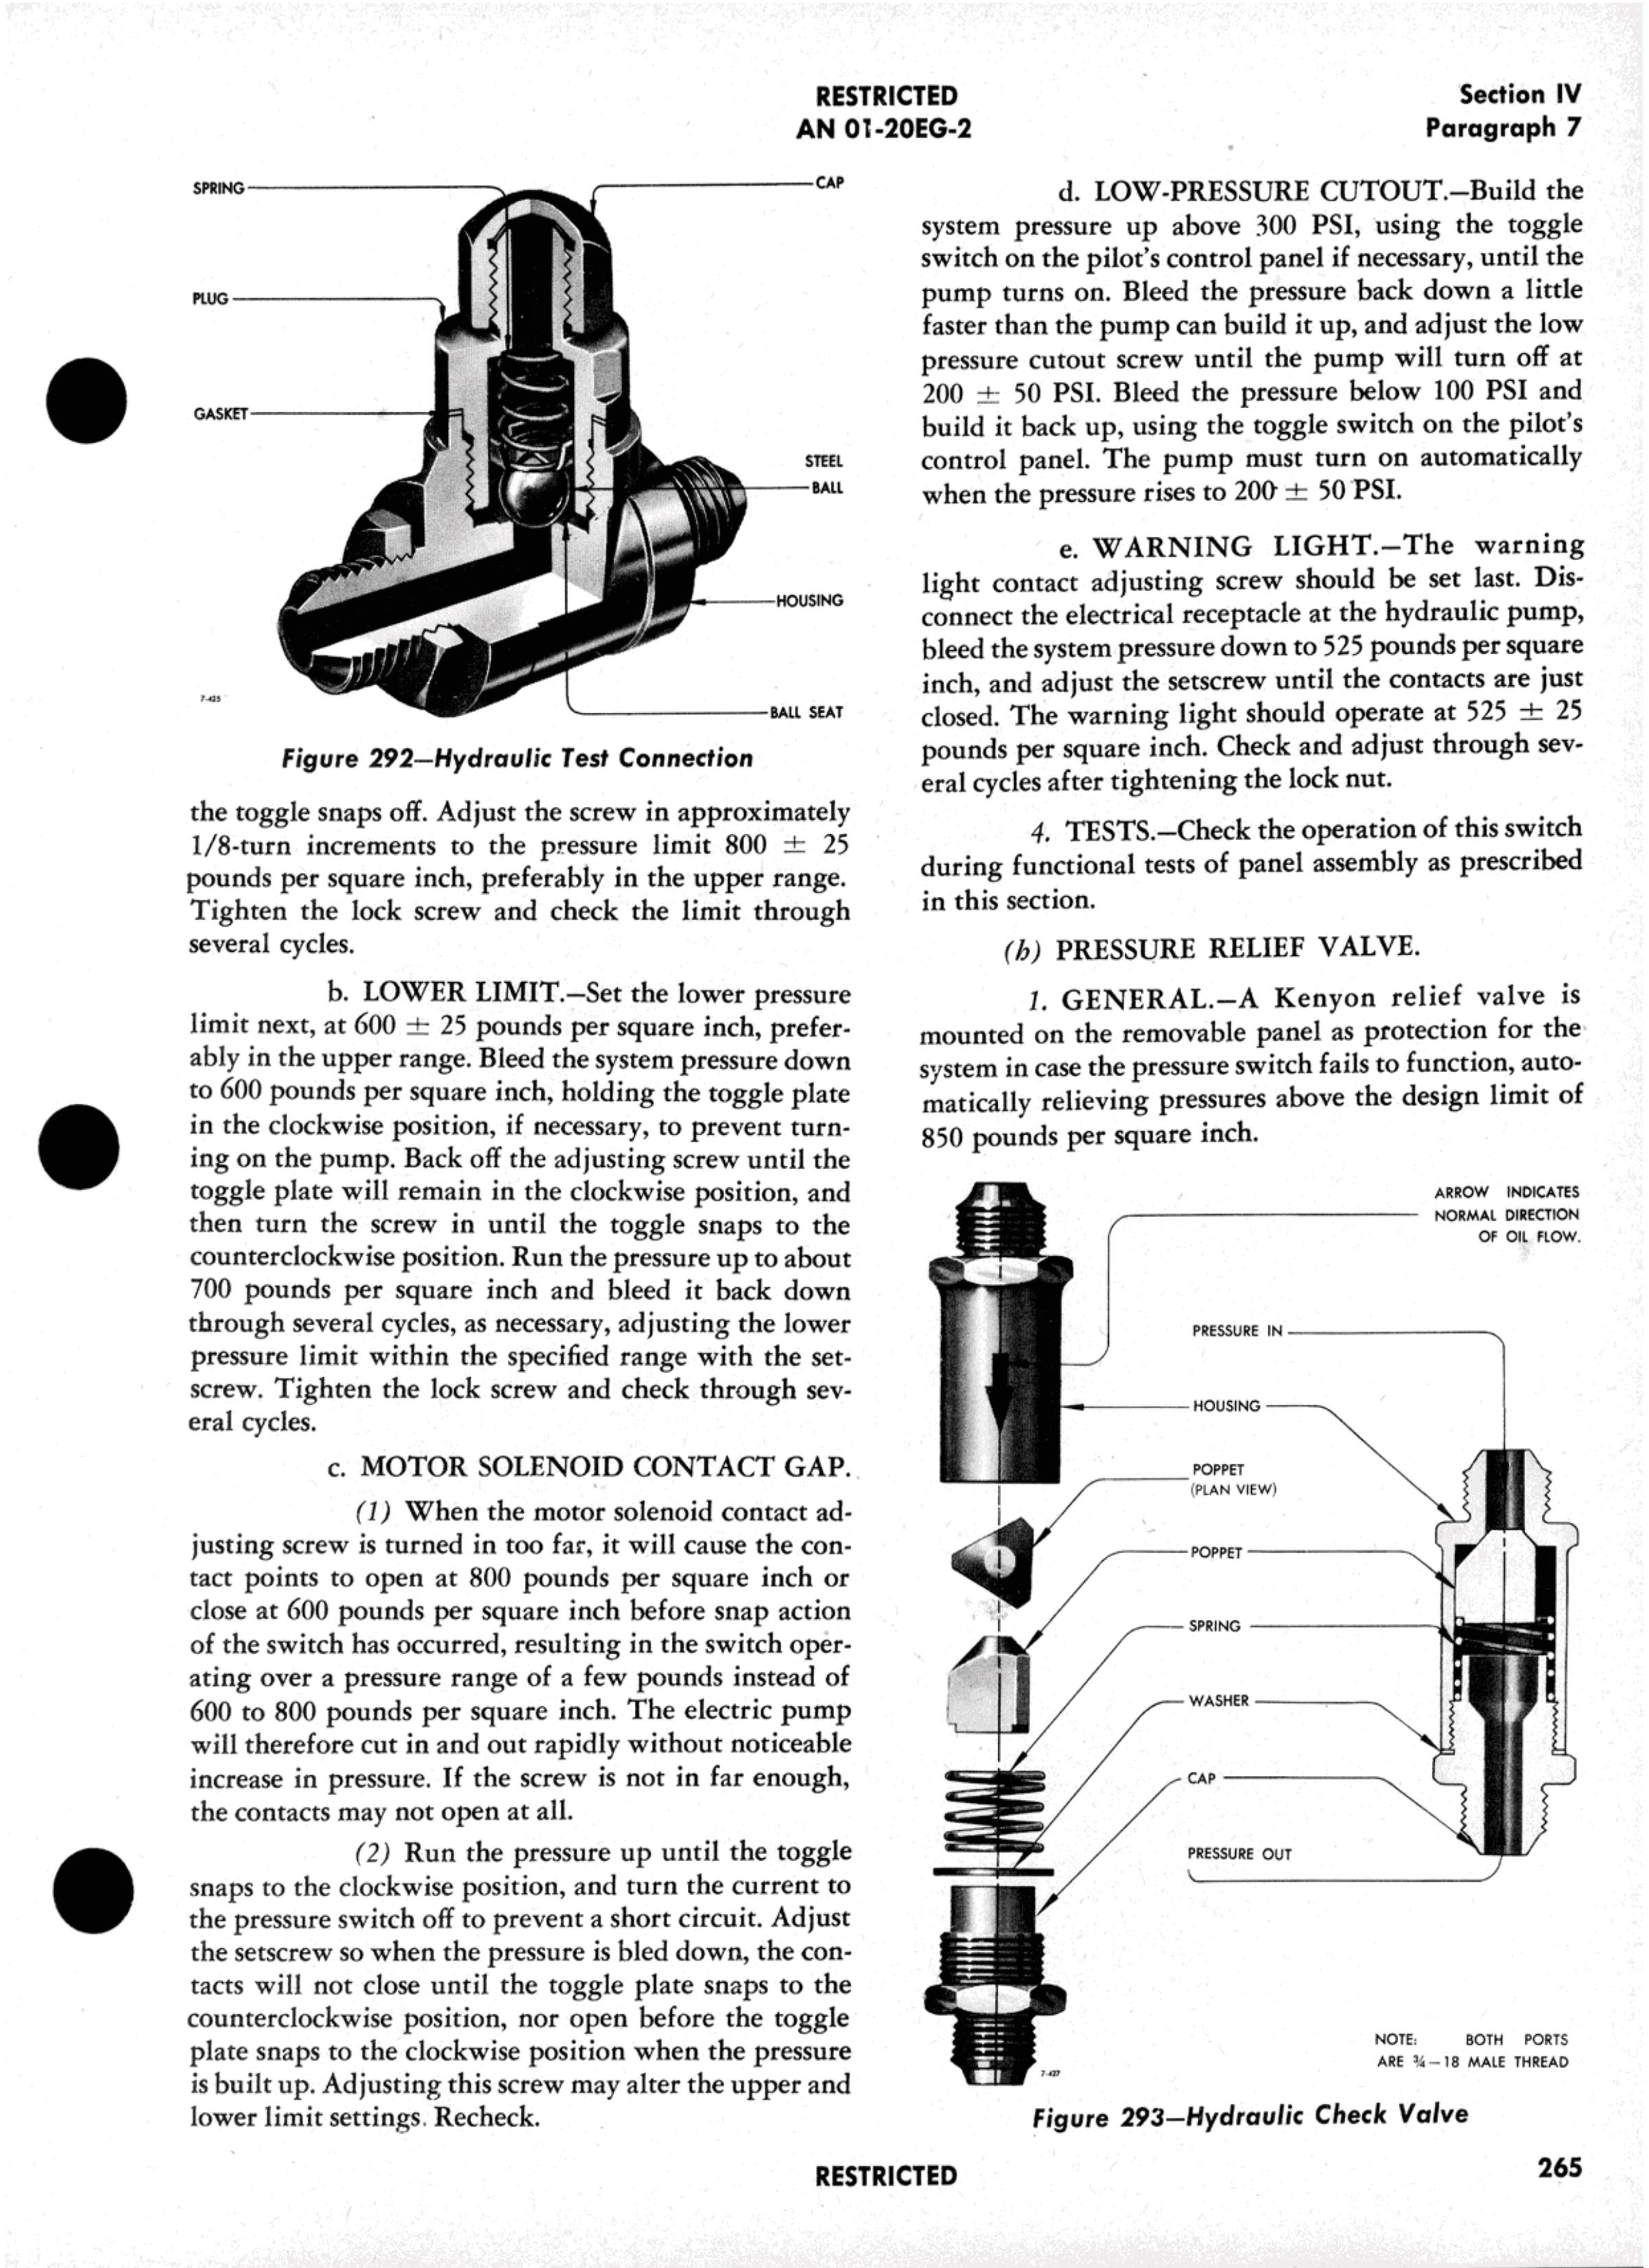 Sample page 269 from AirCorps Library document: Erection & Maintenance - B-17G - Aug 1944